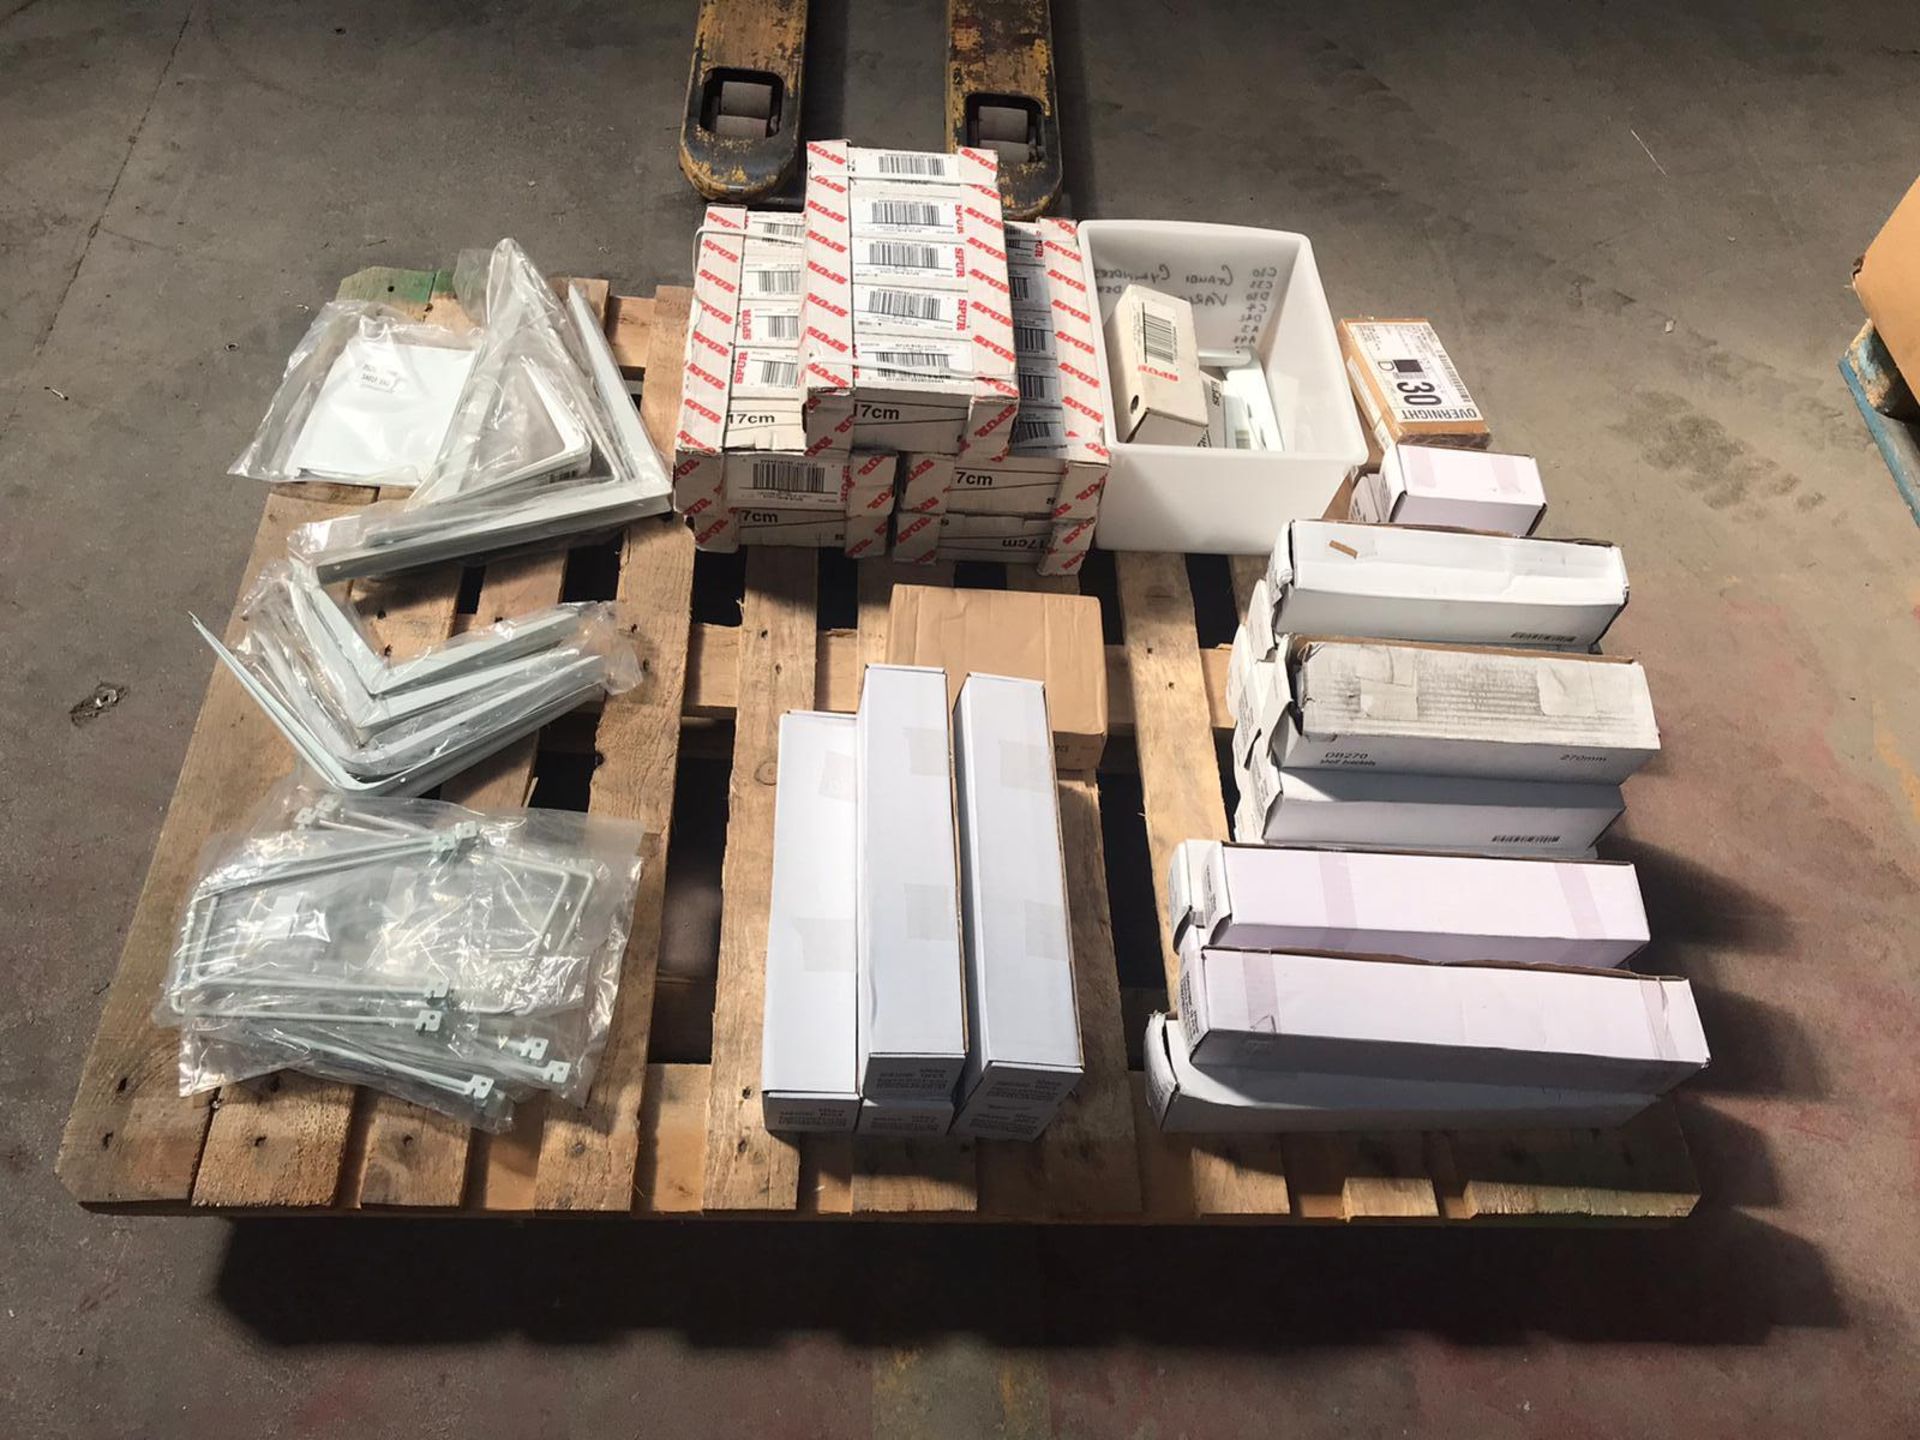 1 x Assorted Pallet Job Lot - Includes Shelving Brackets and Related Shelving Items - Includes